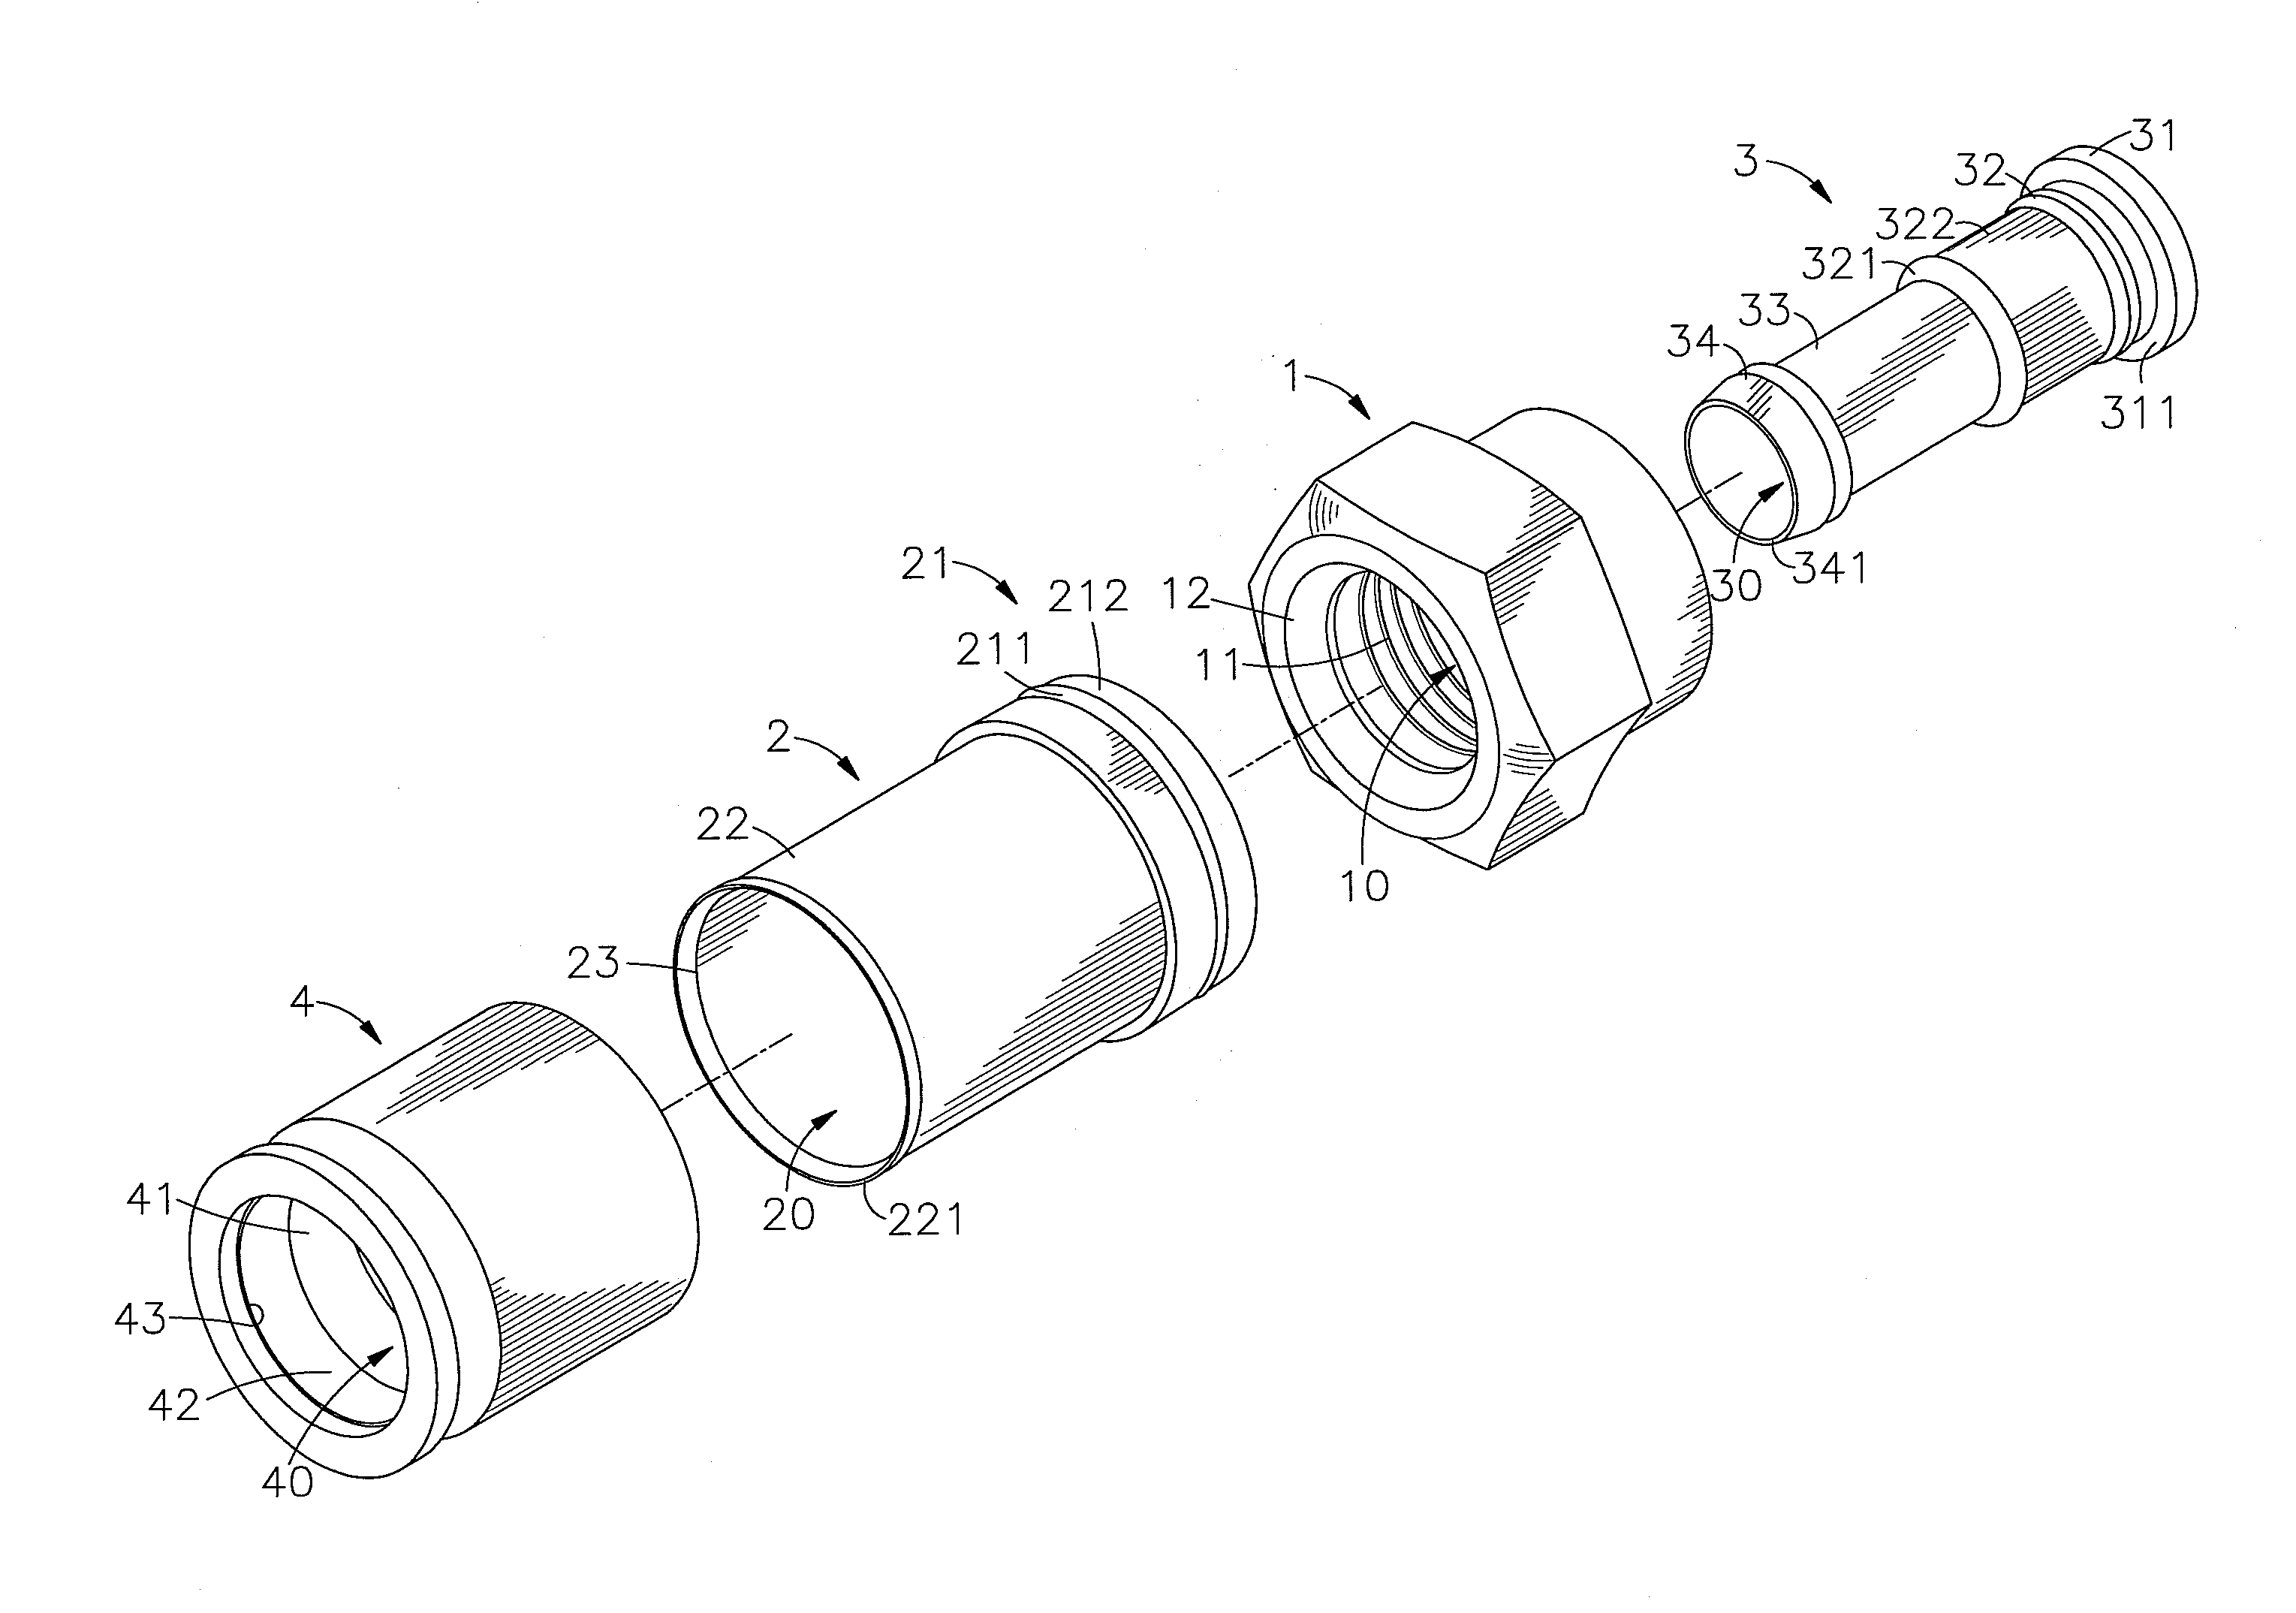 Cable-end connector